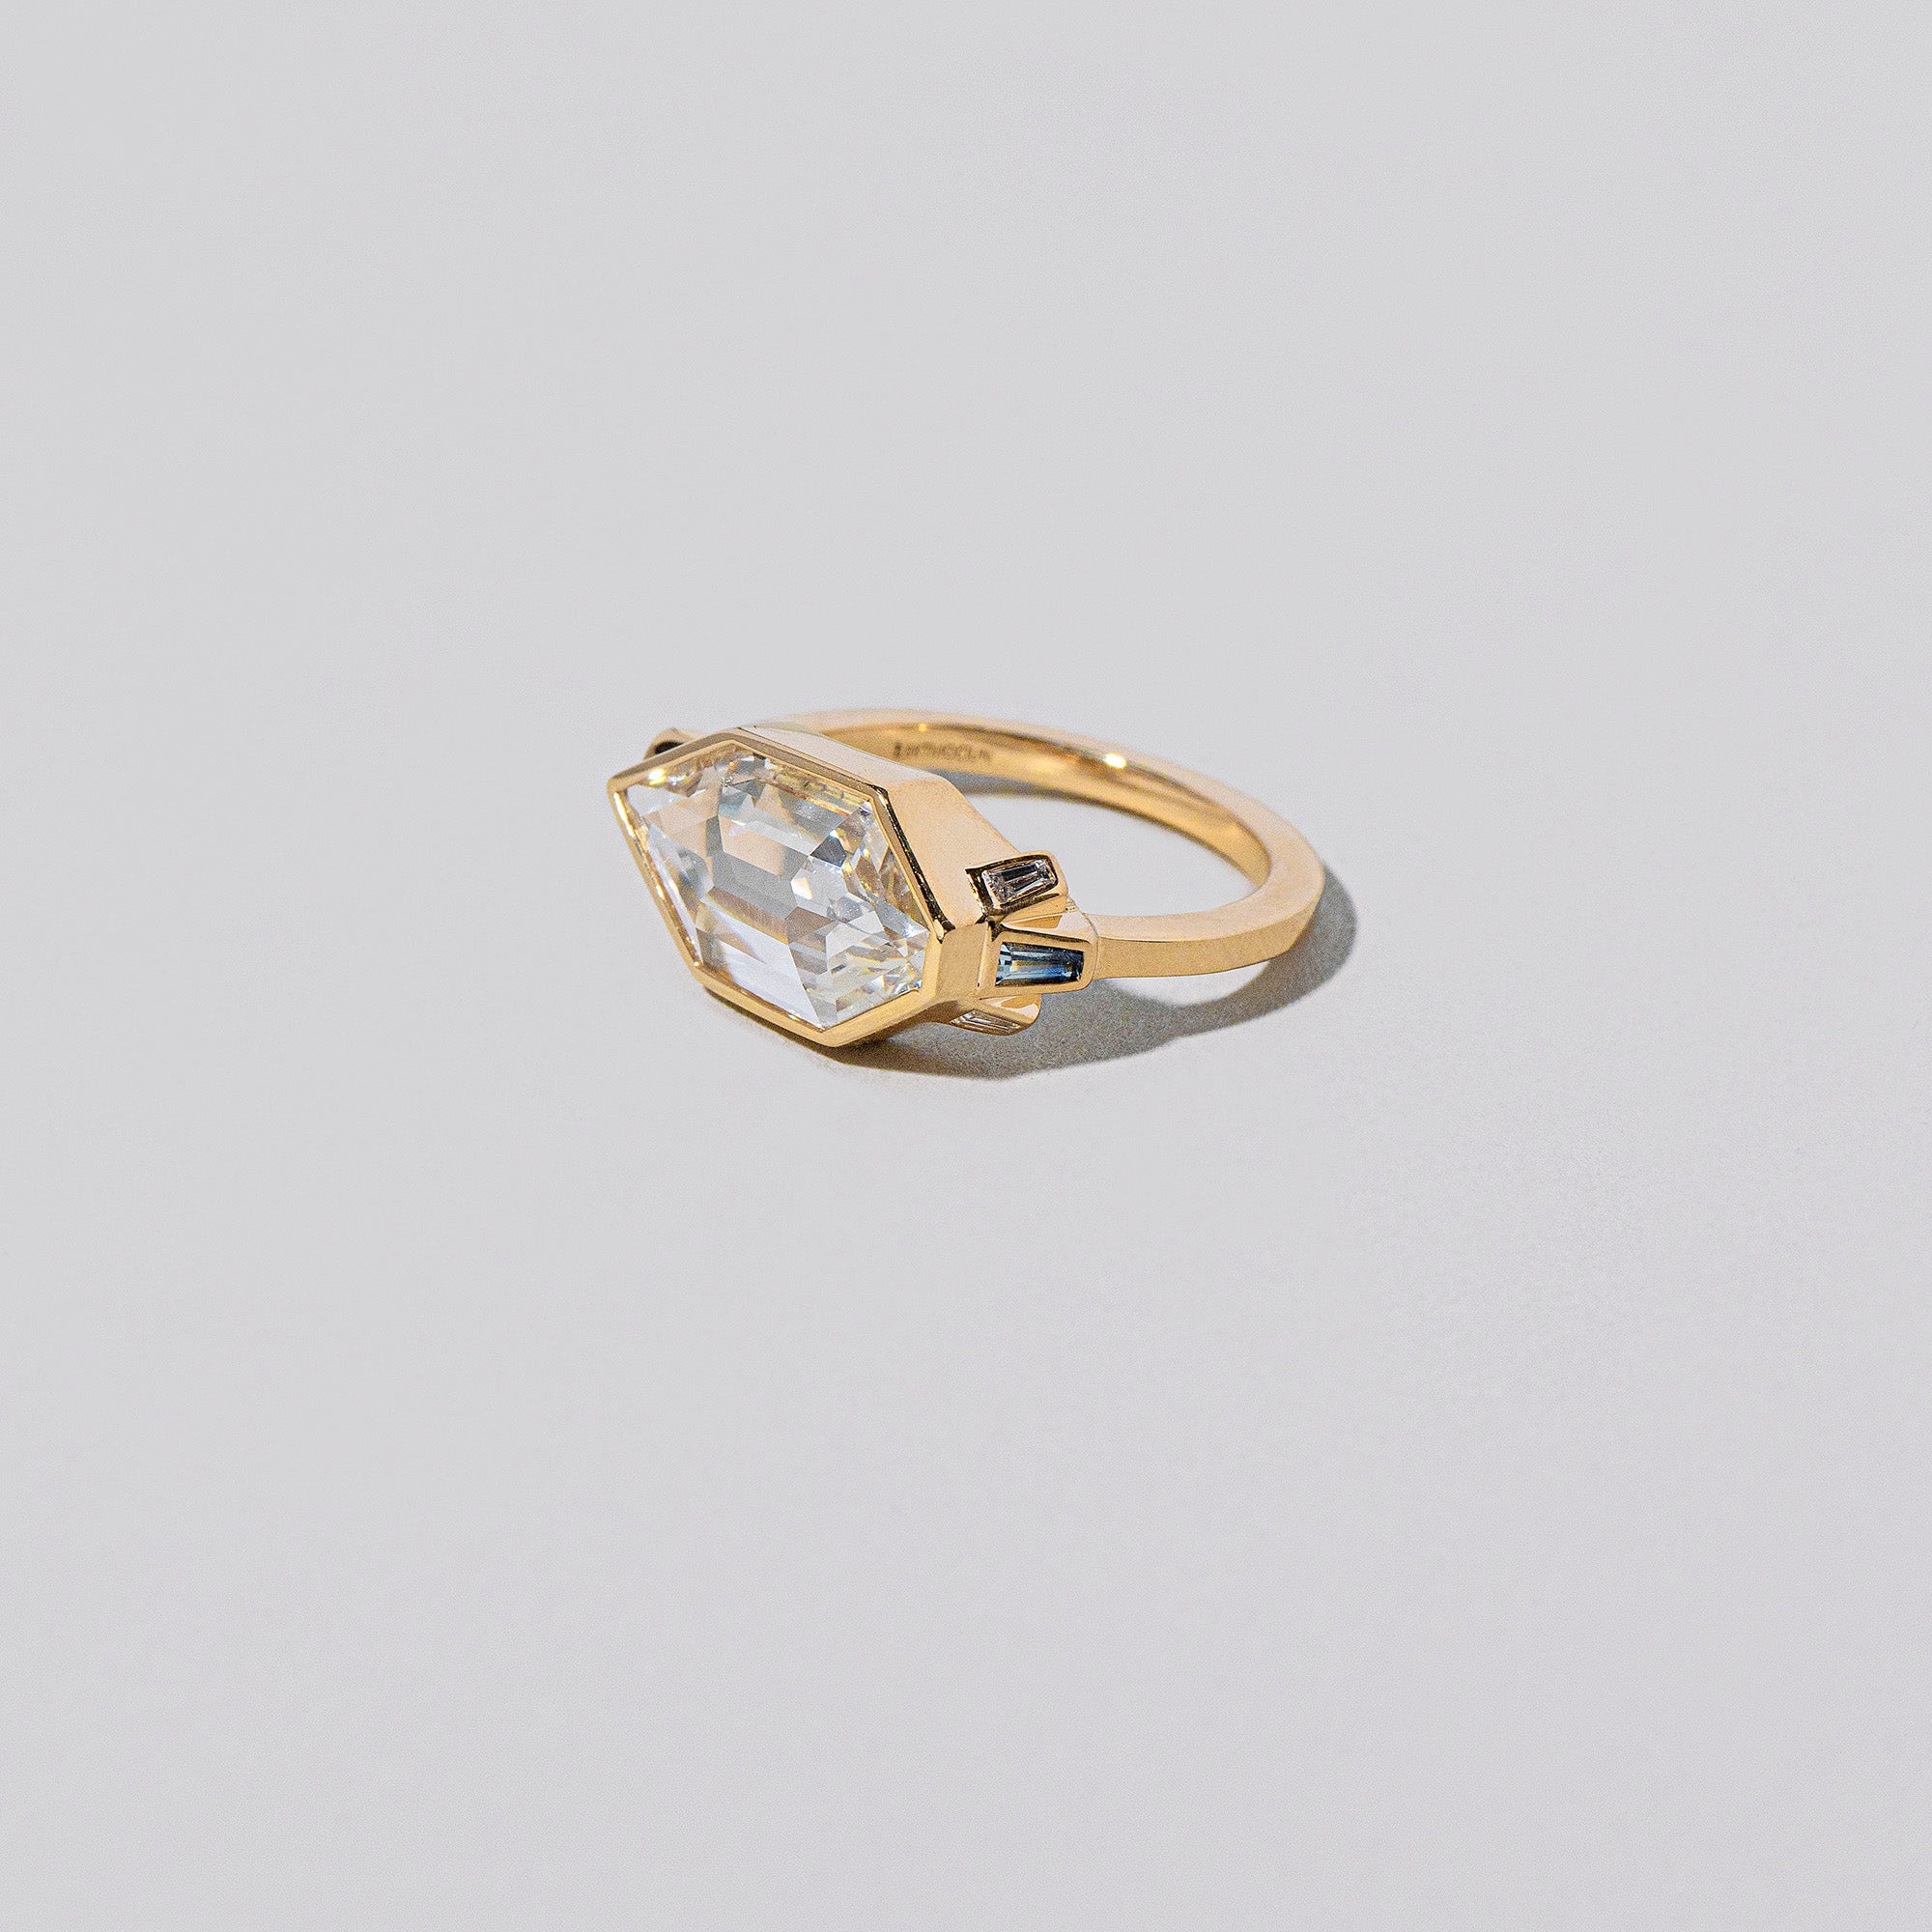 product_details:: Okama Ring on light color background.